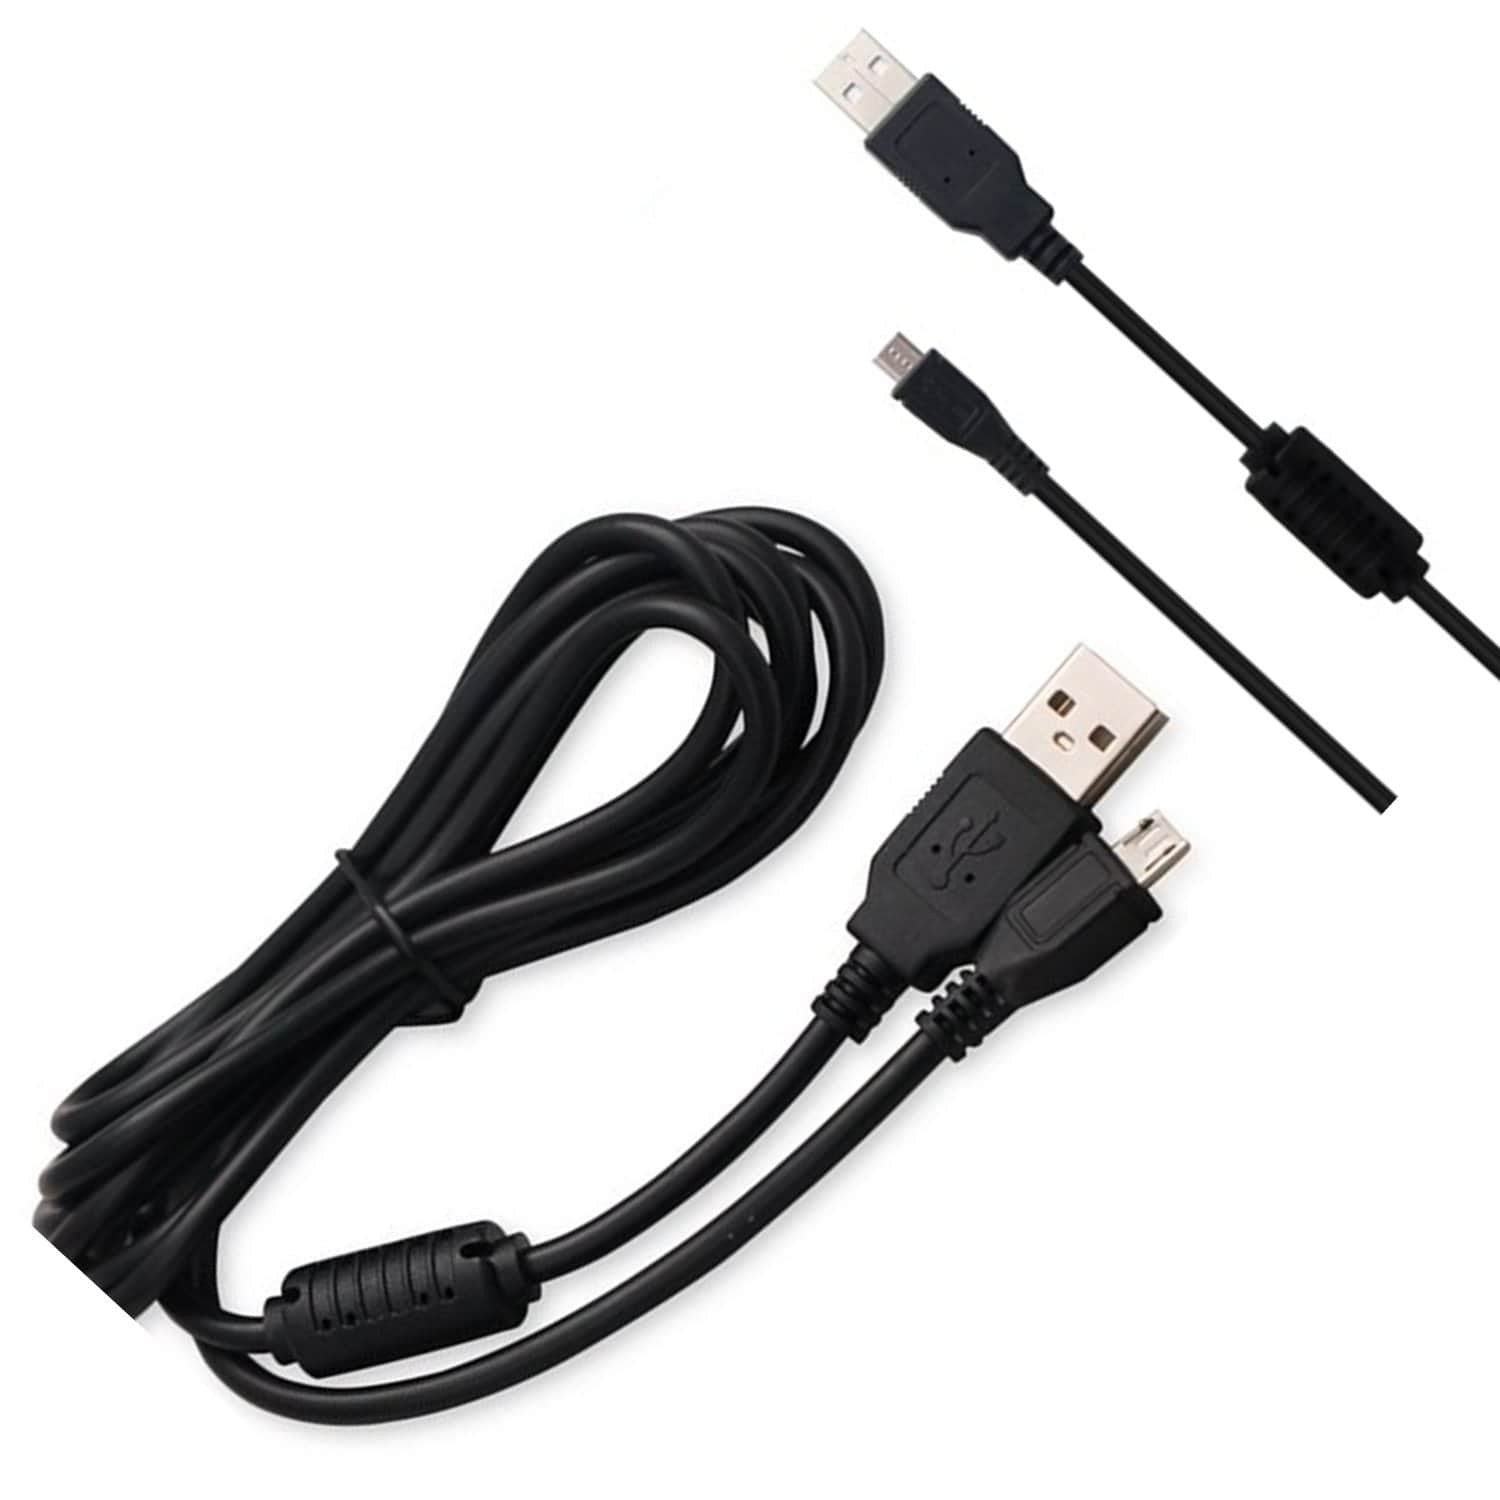 3 meter micro USB cables | Shopna Online Store .